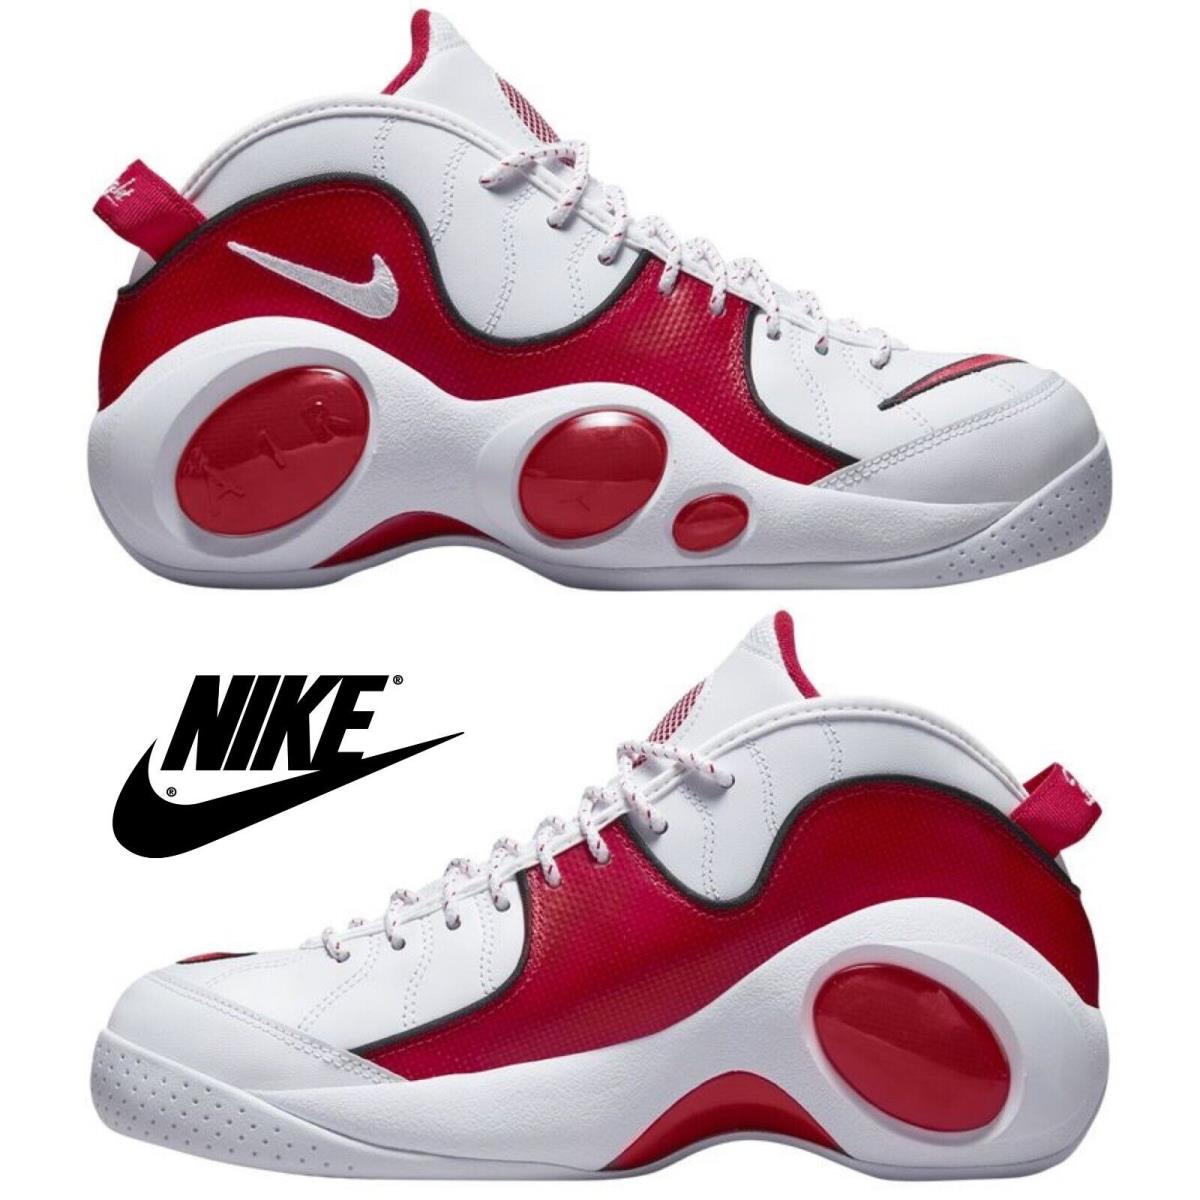 Nike Air Zoom Flight 95 Men`s Basketball Sneakers Comfort Lightweight Shoes - White, Manufacturer: White/Black/Red